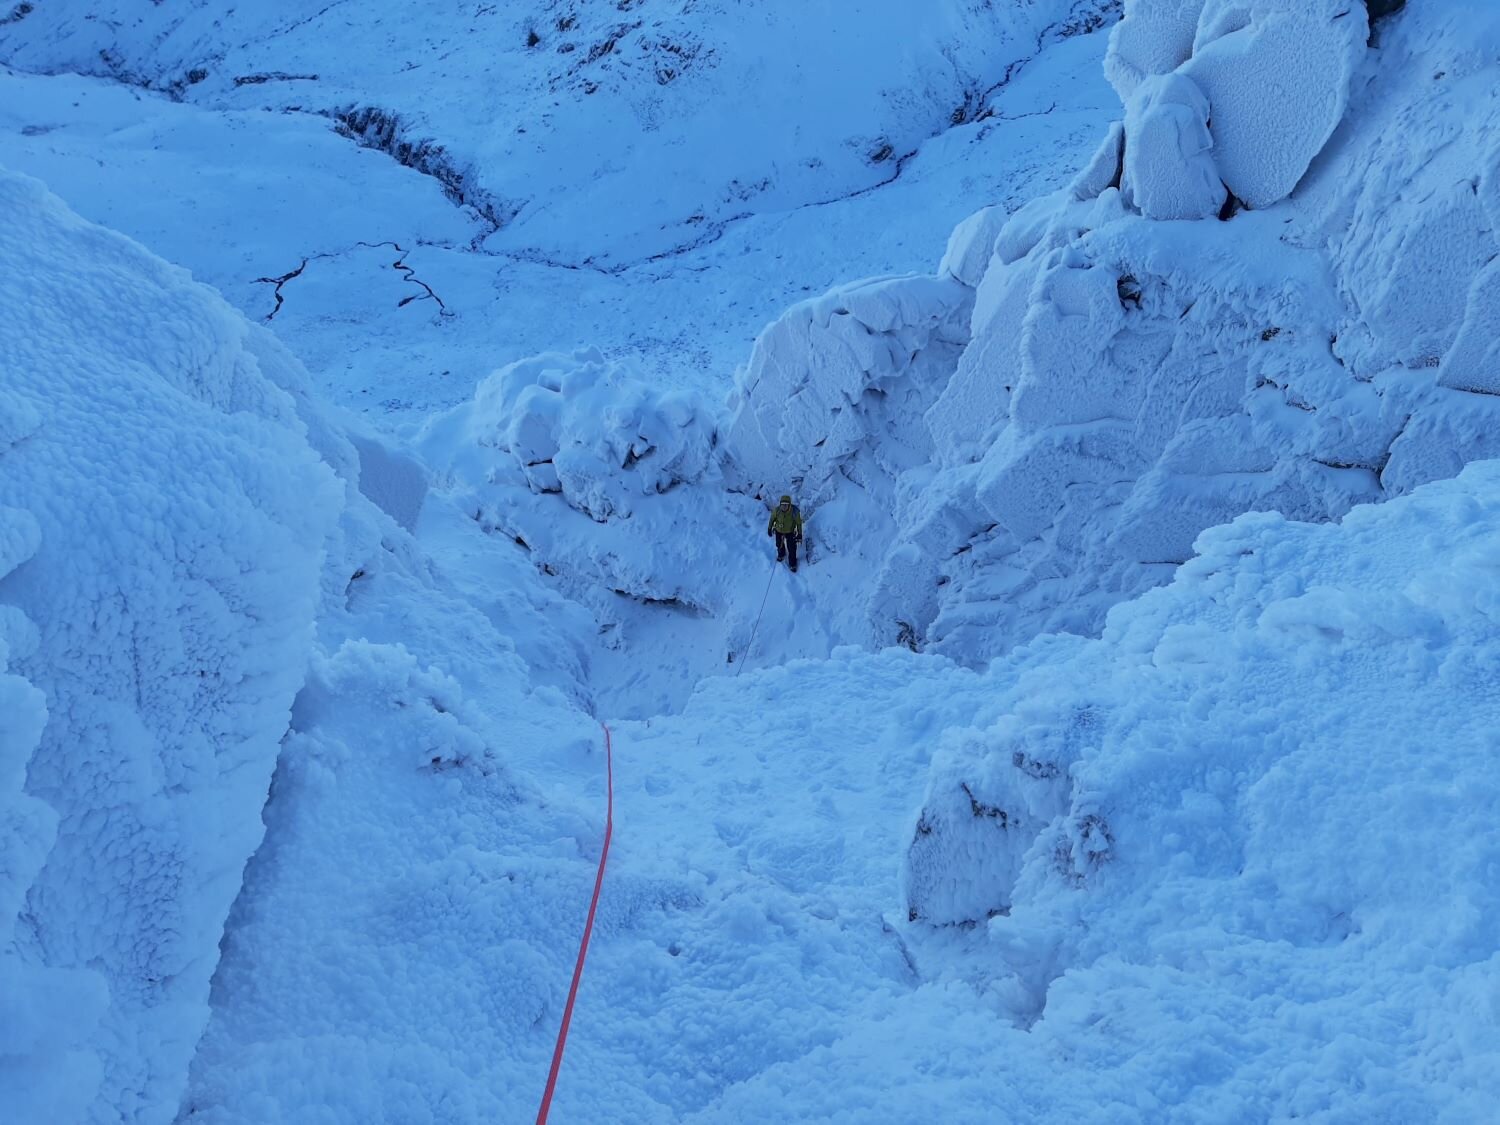  Winter climbing in the Lake District - Chris Ensoll Mountain Guide 